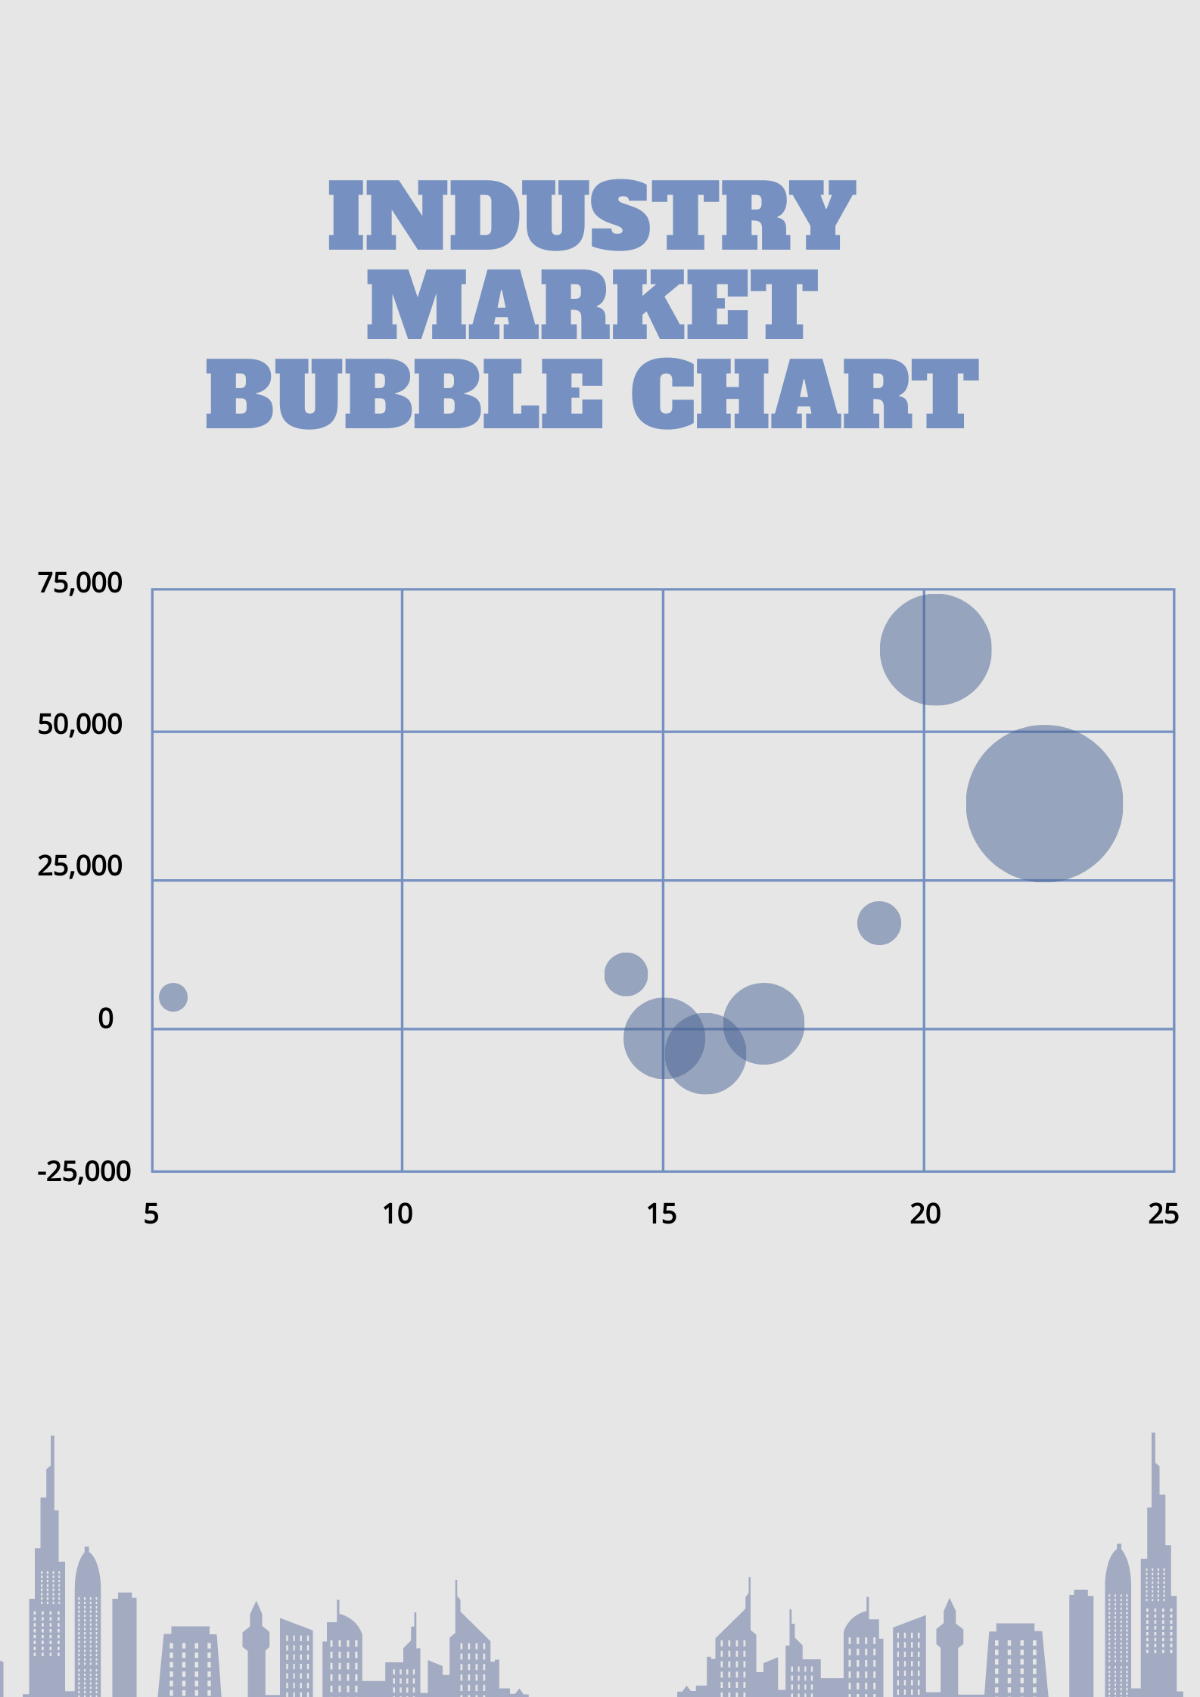 Industry Market Share Bubble Chart Template